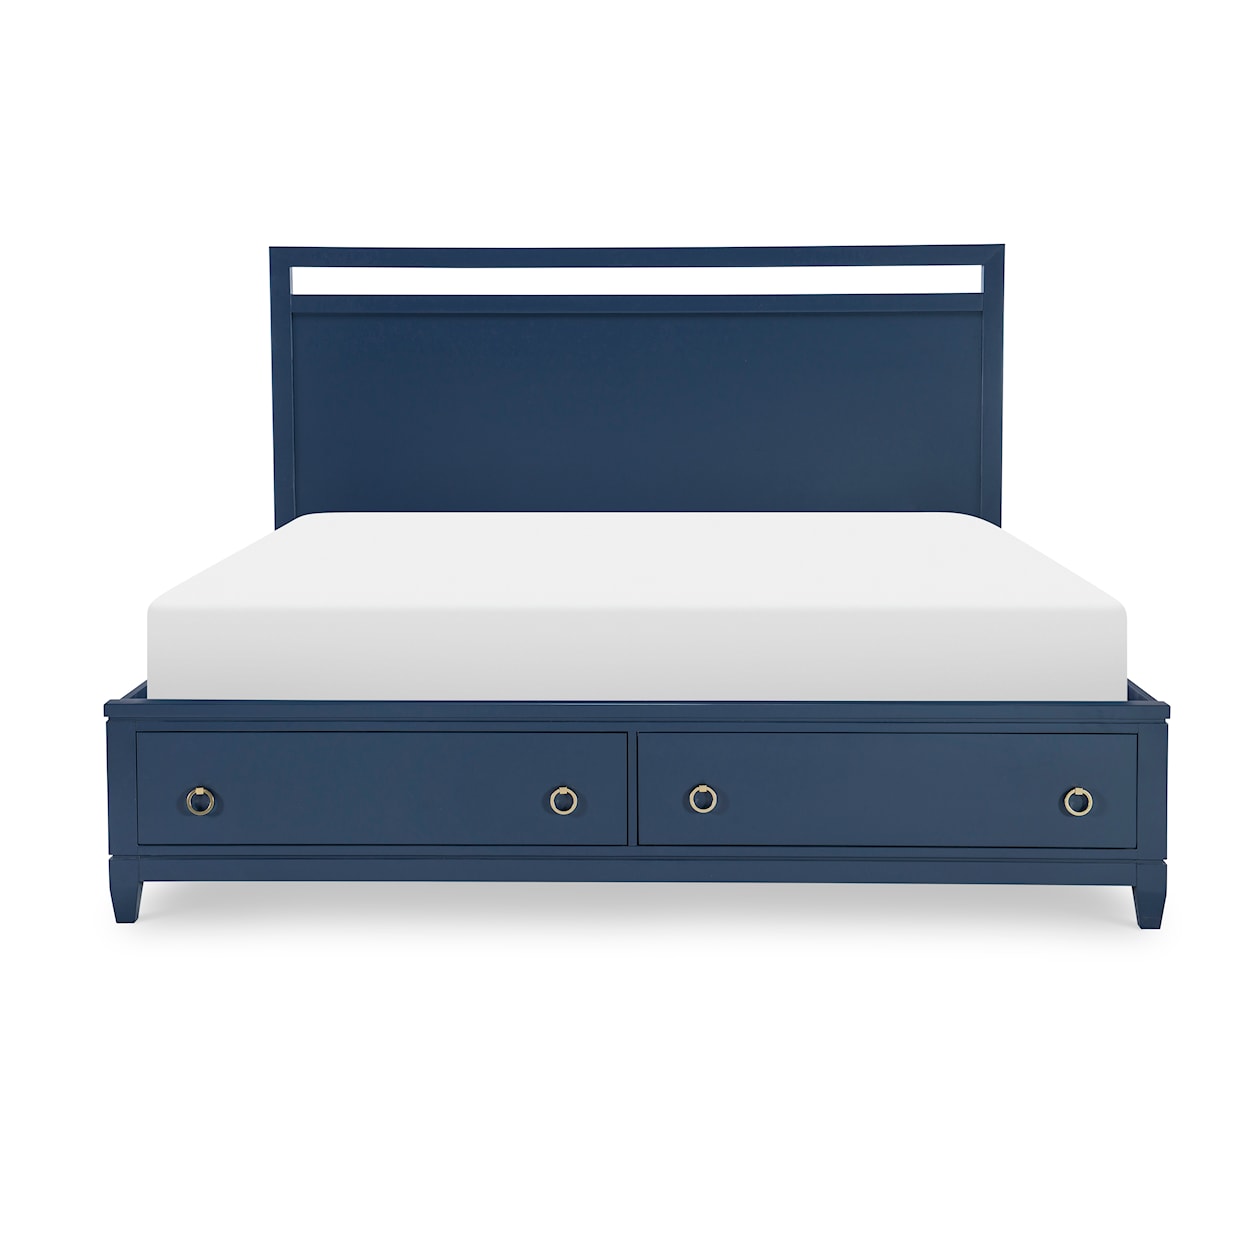 Legacy Classic Summerland King Storage Bed